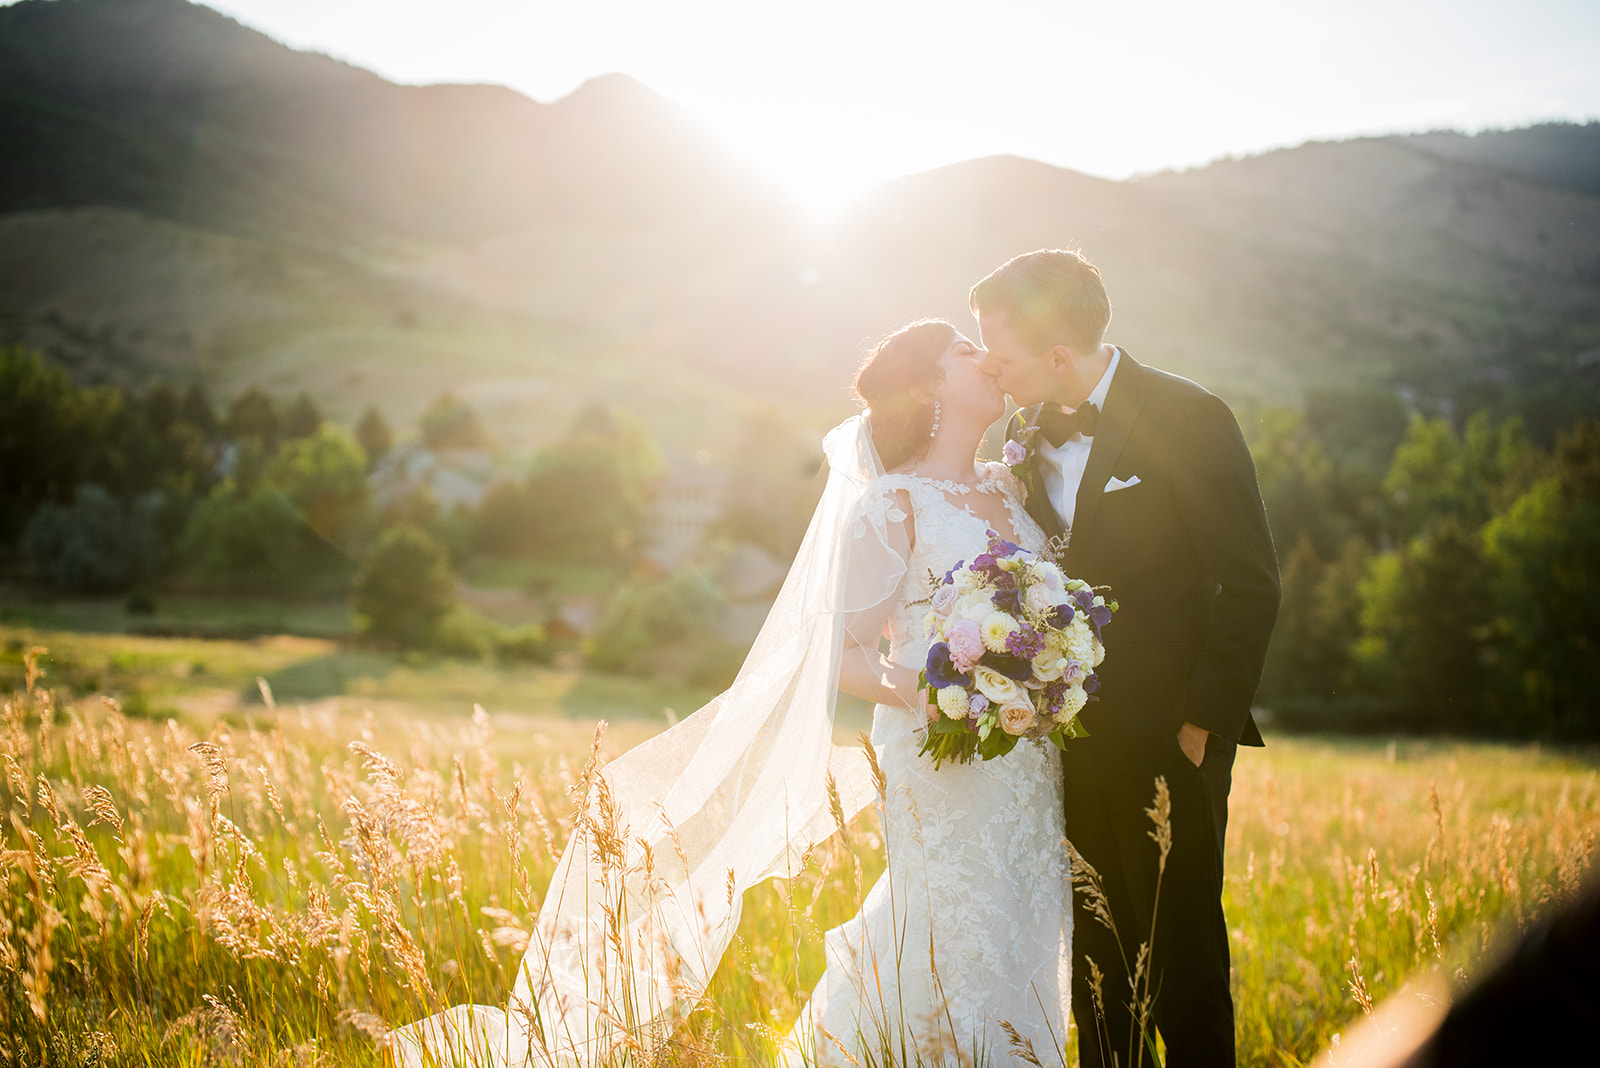 The bride and groom share a kiss in a golden field with the sunset behind them.